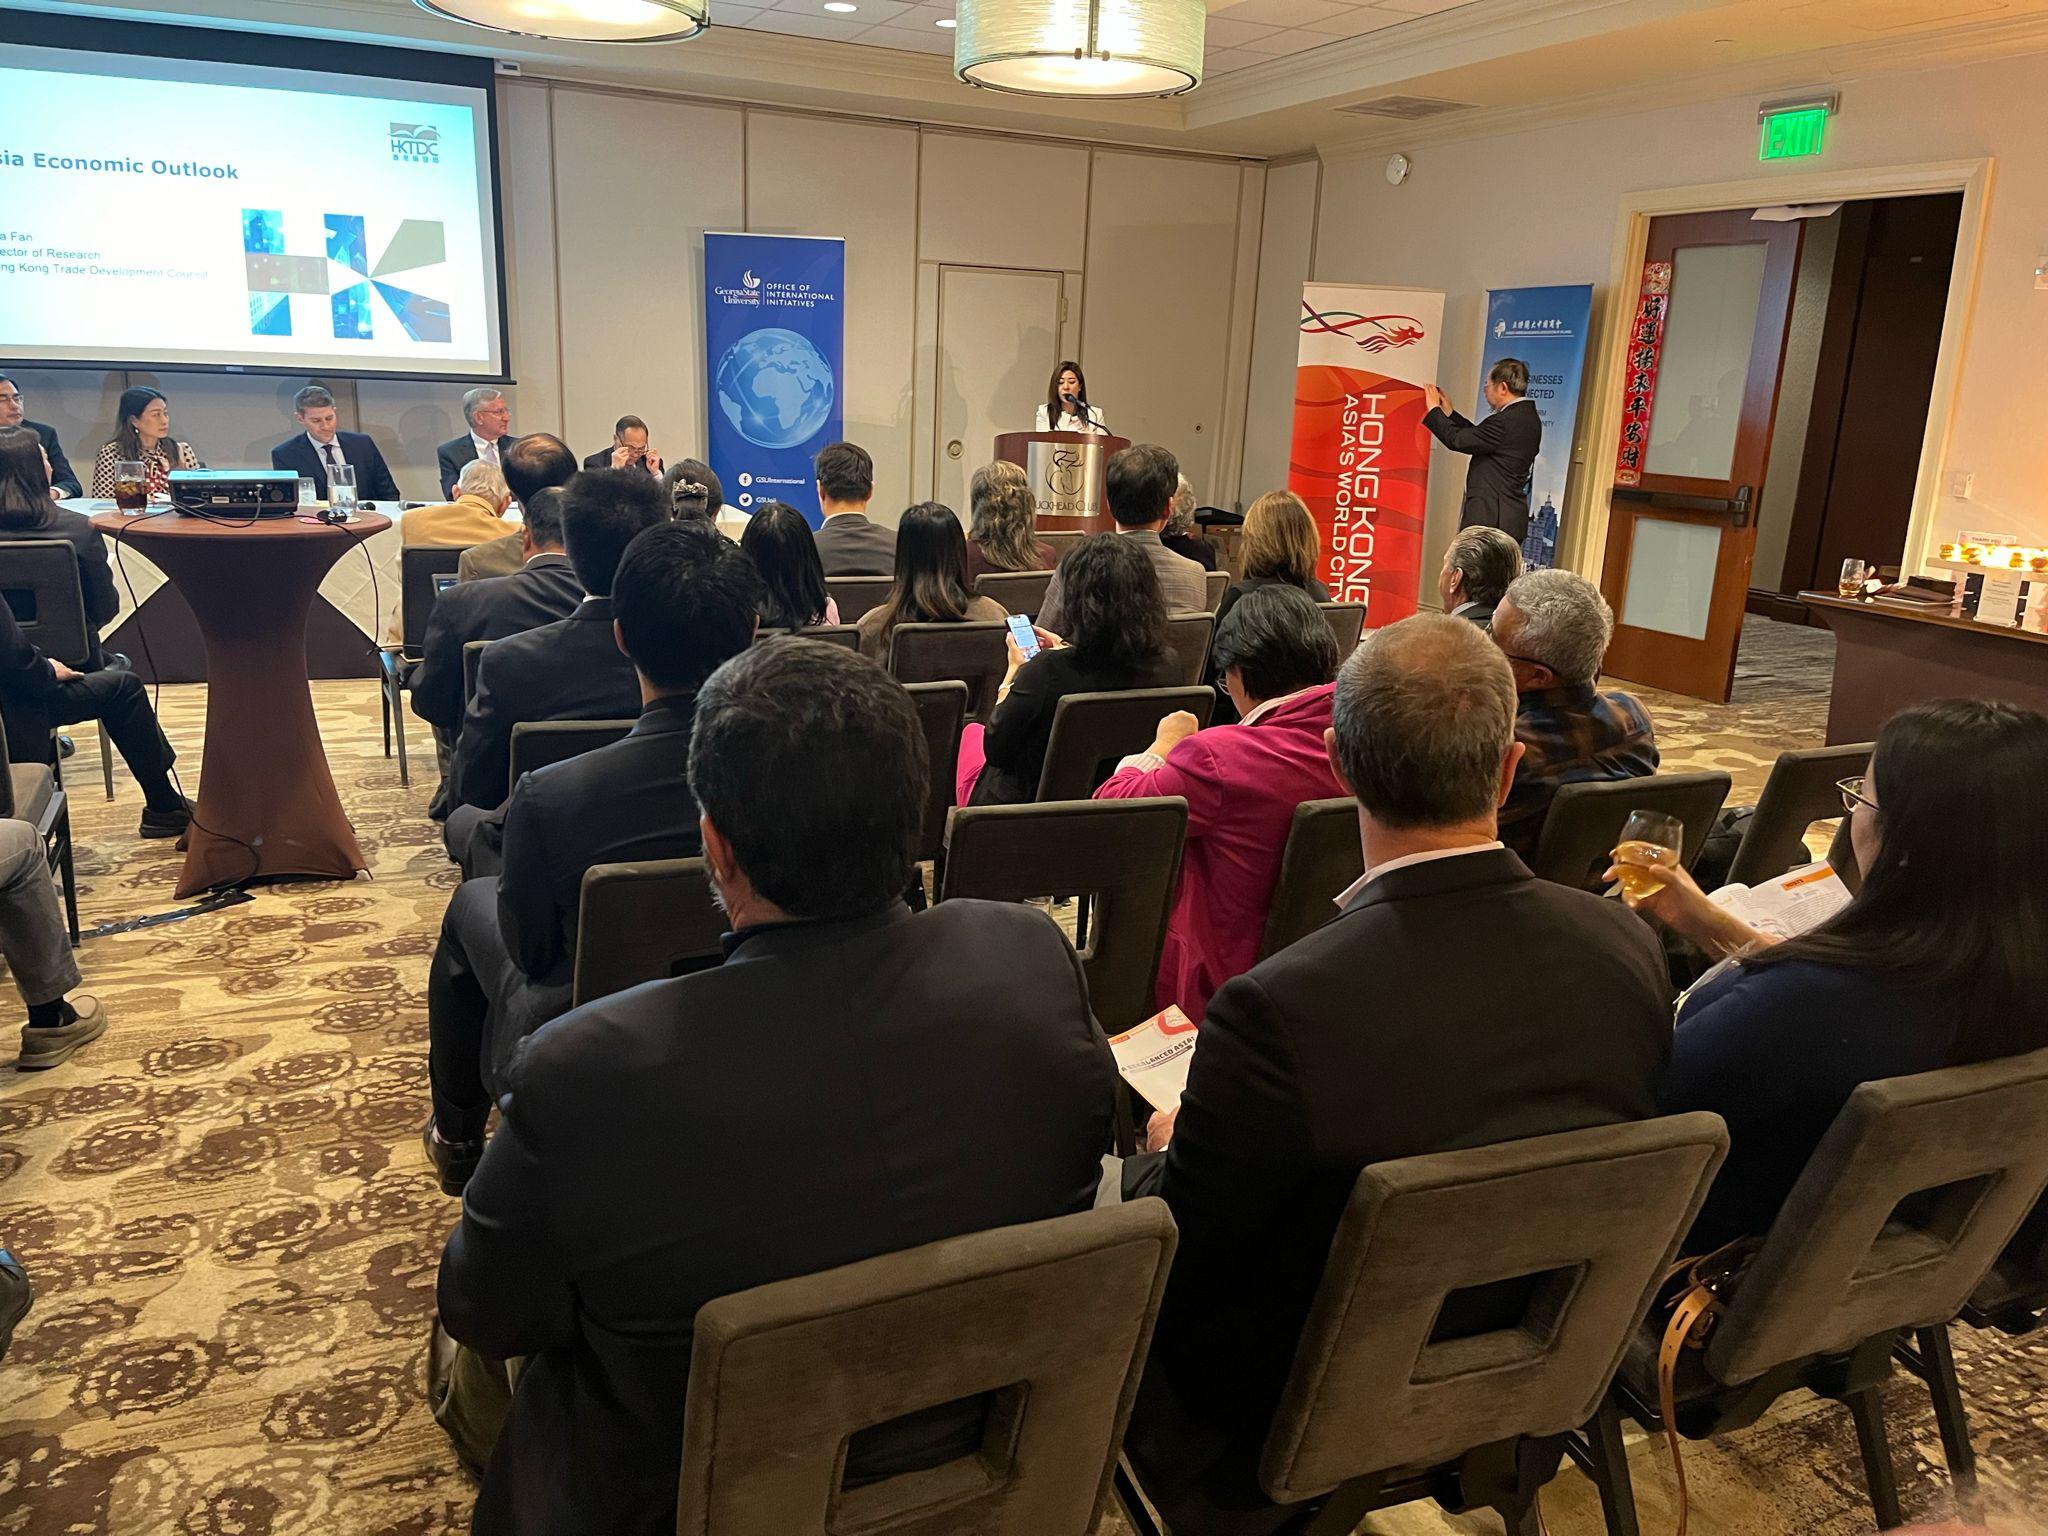 The Director of the Hong Kong Economic and Trade Office, New York, Ms Maisie Ho, promoted Hong Kong's fintech and innovation and technology during her three-day duty visit in Atlanta, Georgia from February 21 to 23 (Atlanta time). Photo shows Ms Ho speaking at a Lunar New Year business forum organised by the Hong Kong Association of Atlanta, World Trade Center Atlanta and the Office of International Initiatives of Georgia State University in the evening of February 22 to explore the role of artificial intelligence, data management and electric vehicles in Asia.